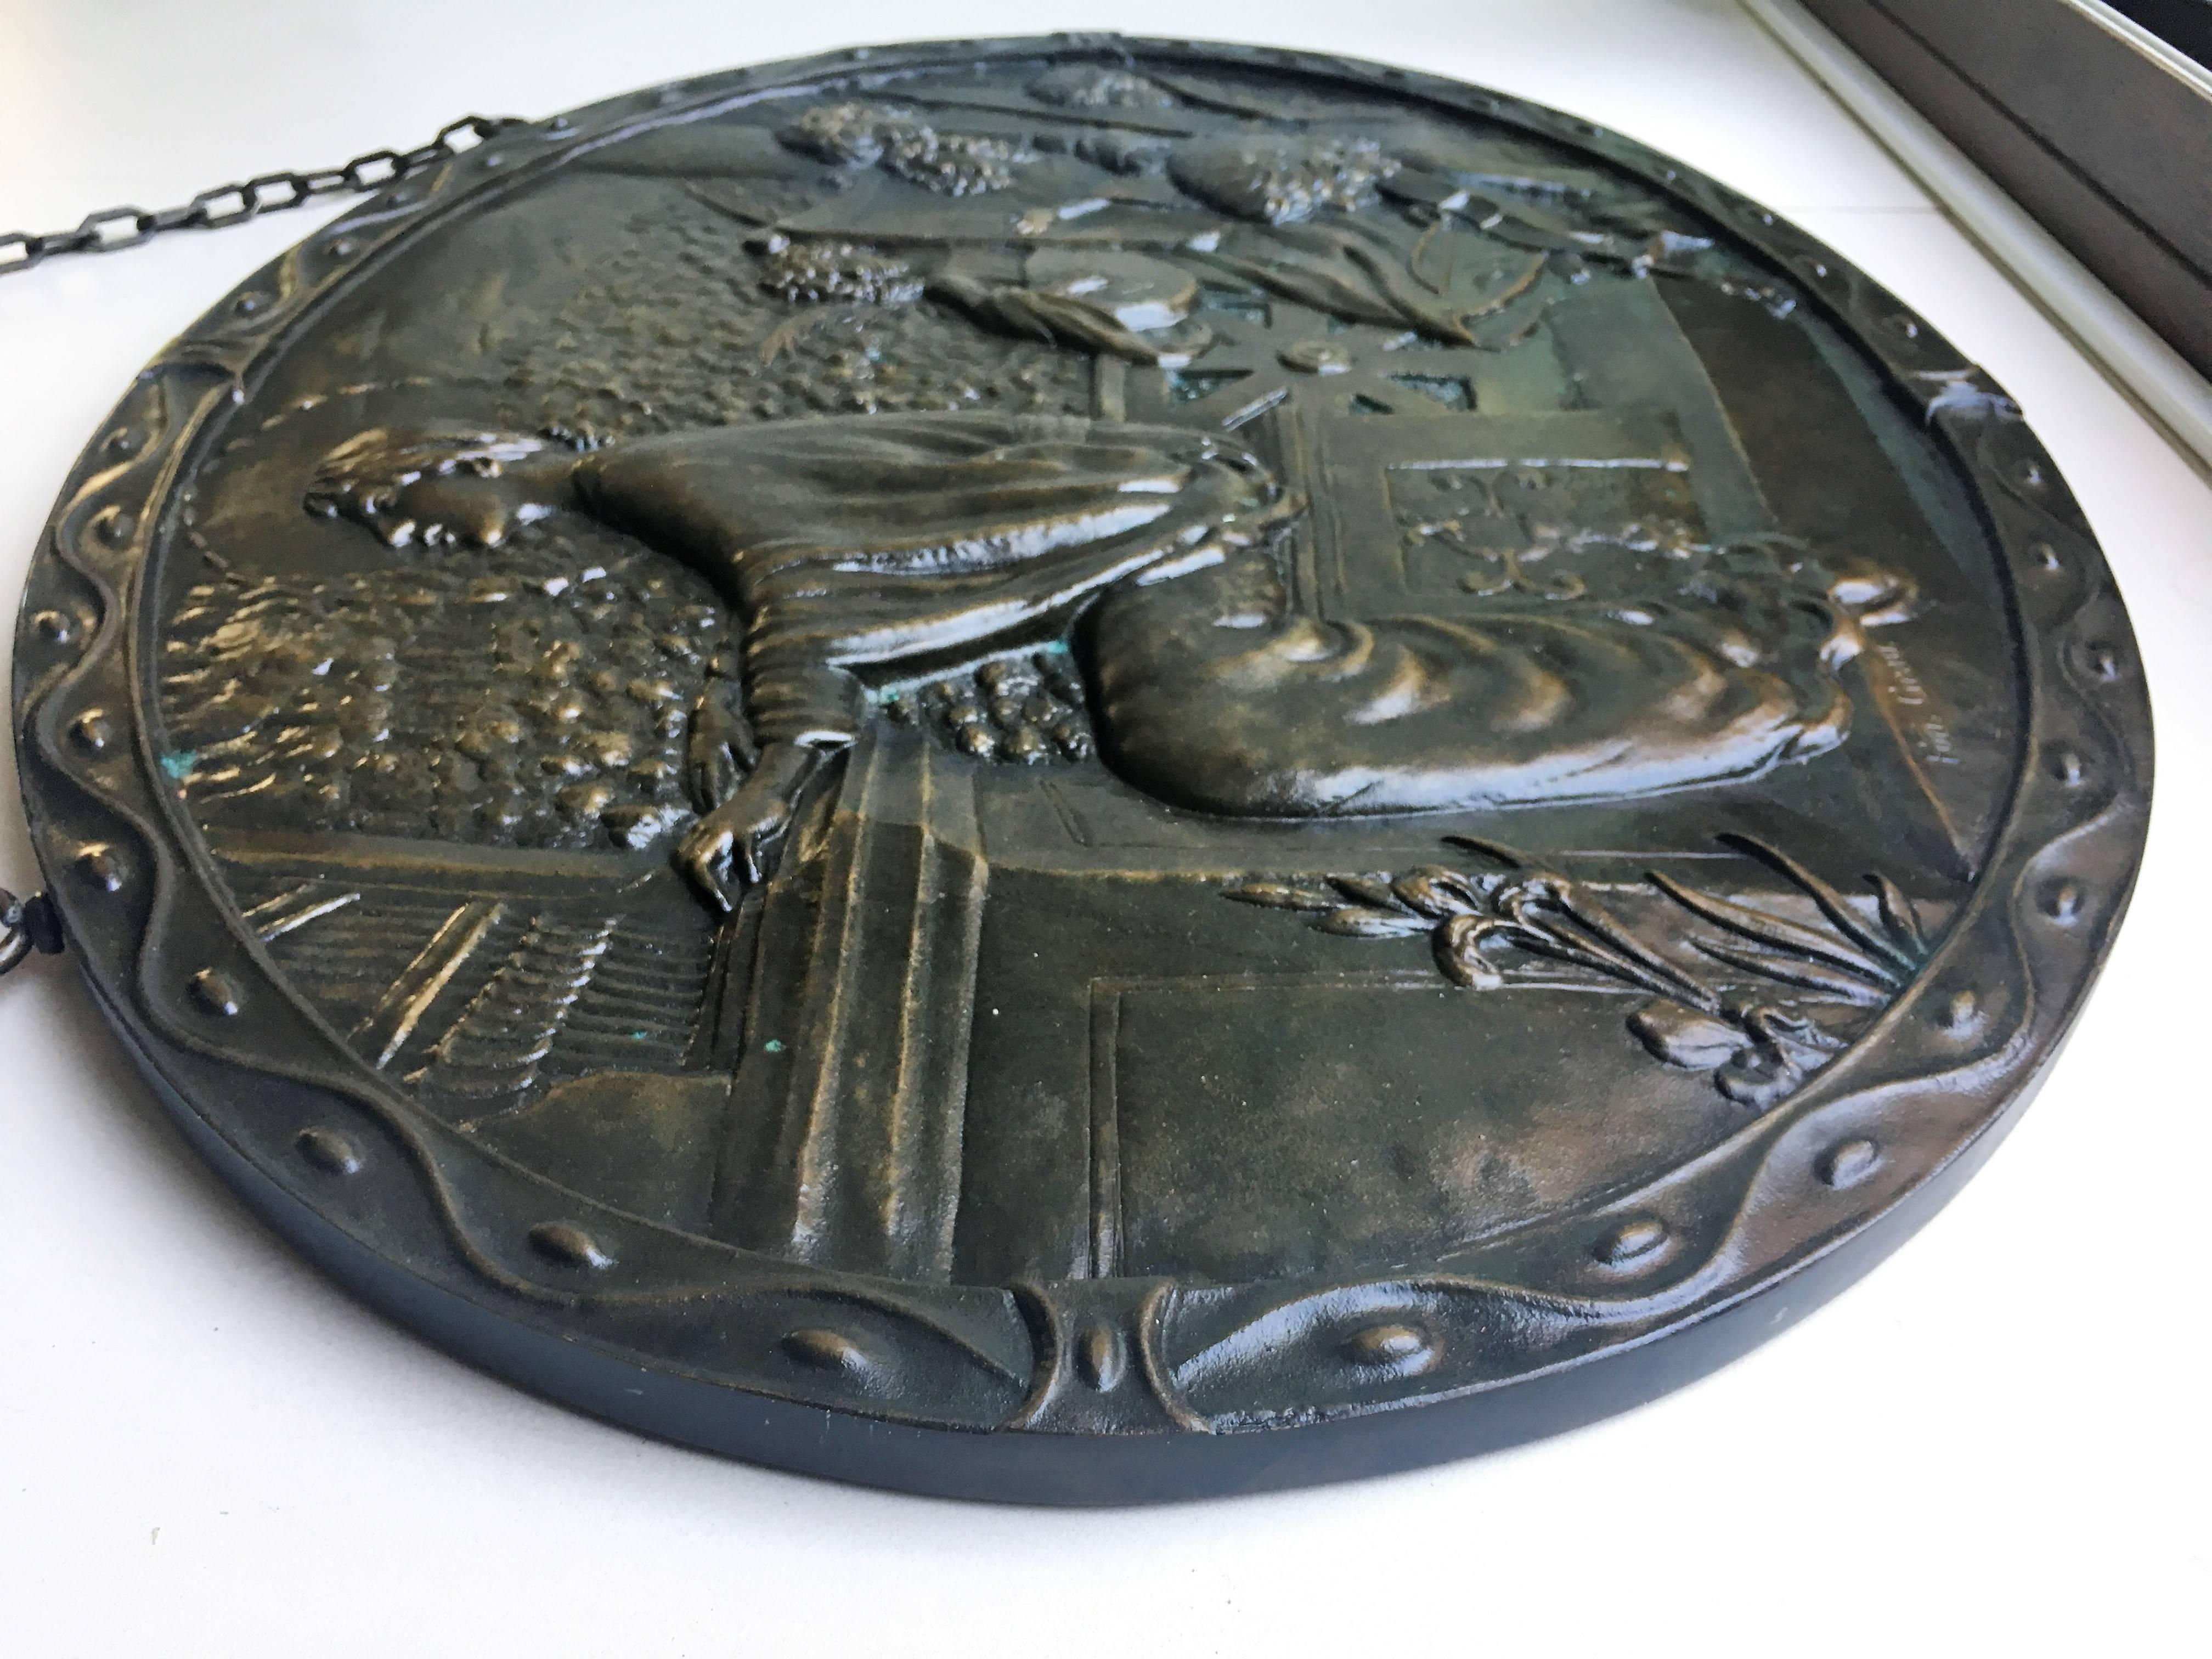 Hand-Carved 19th Century Relief Bronze Masterpiece with Cherubs in a Barrel-Organ For Sale